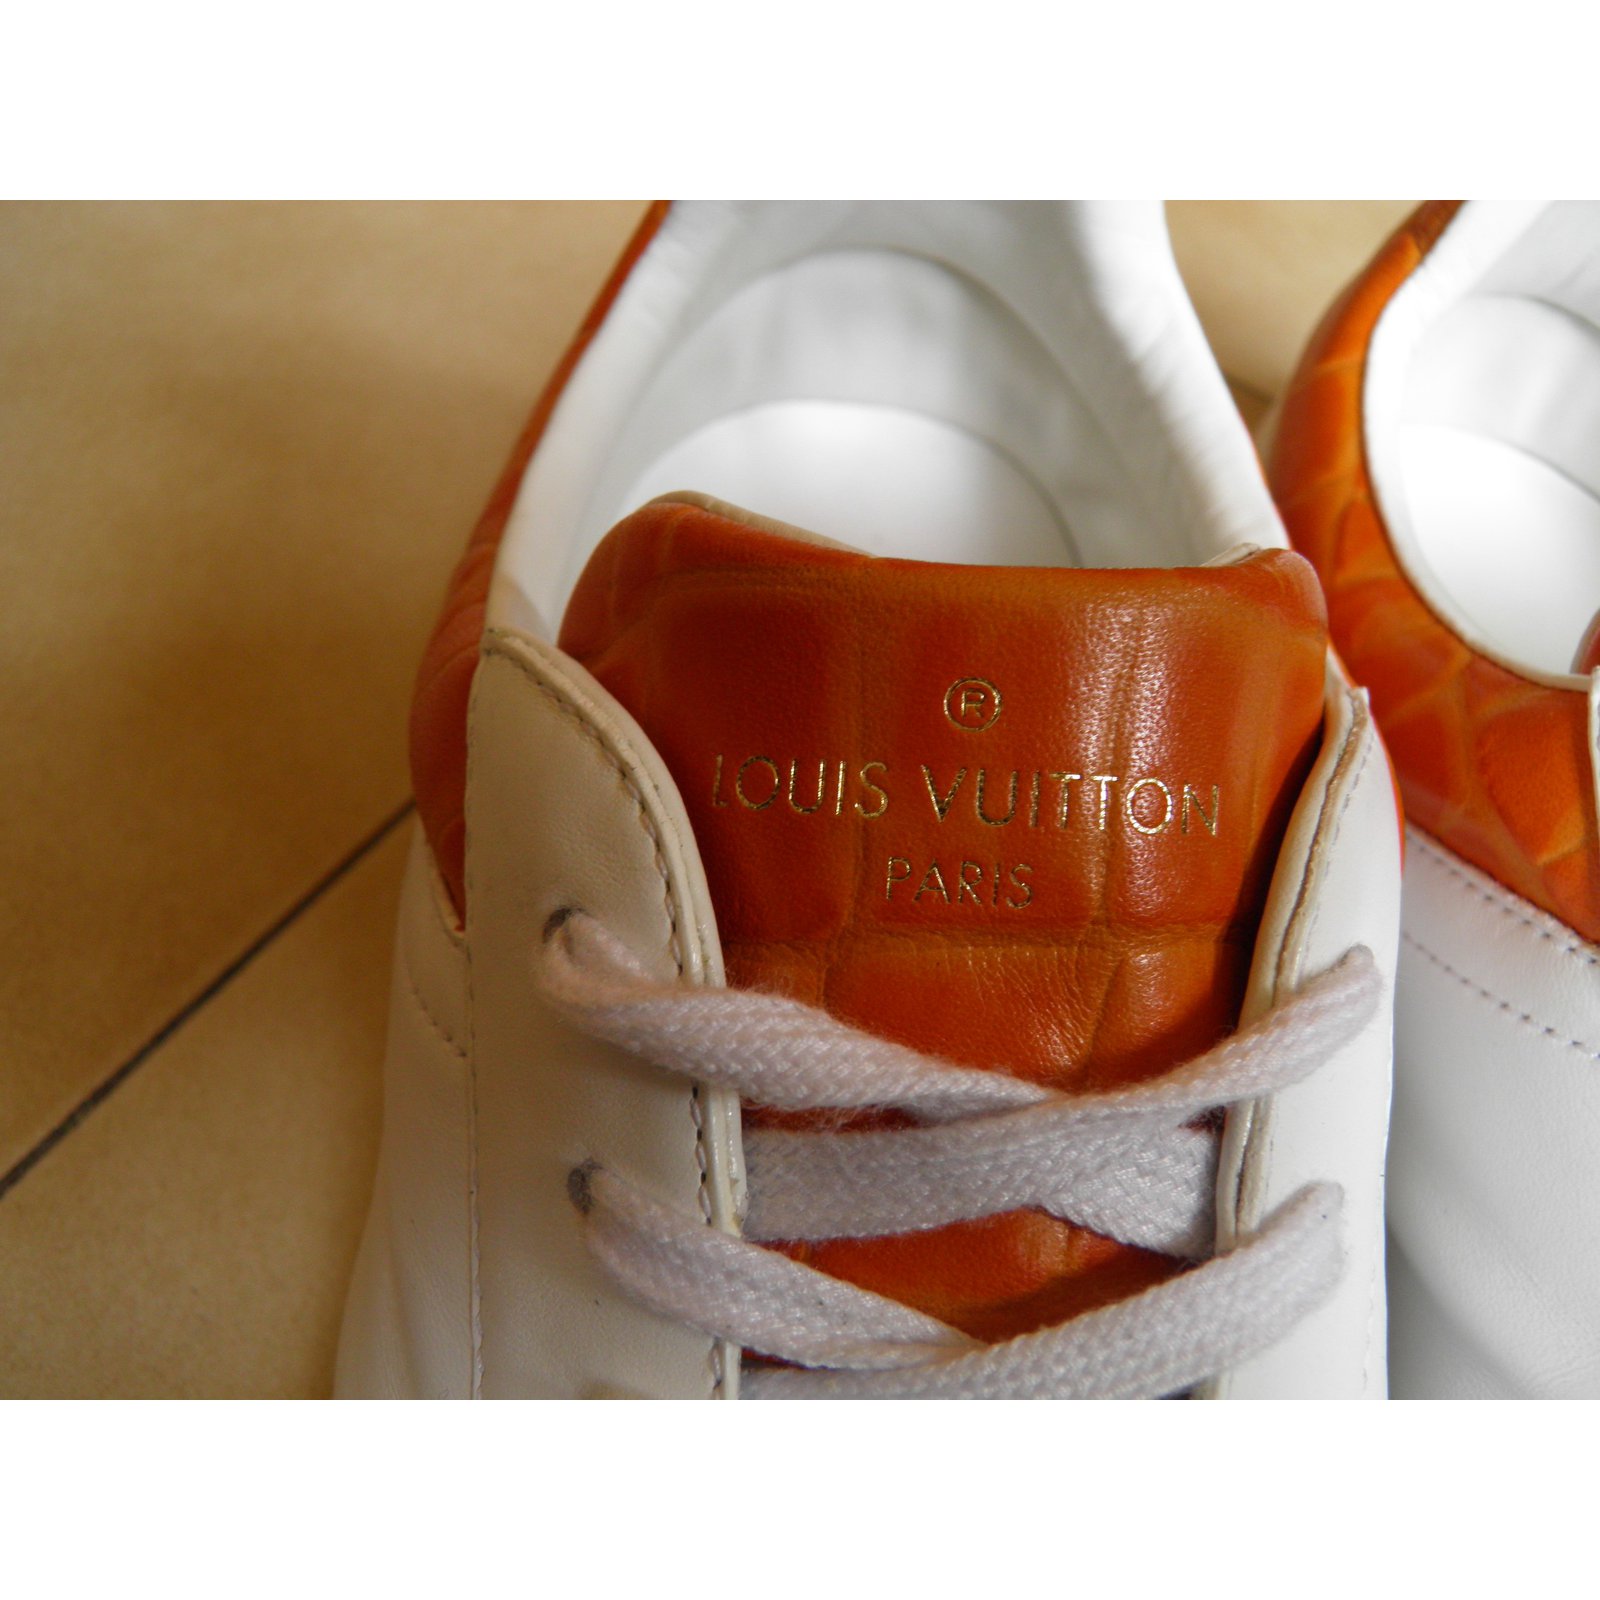 LOUIS VUITTON, a pair of white leather and red suede sneakers. - Bukowskis